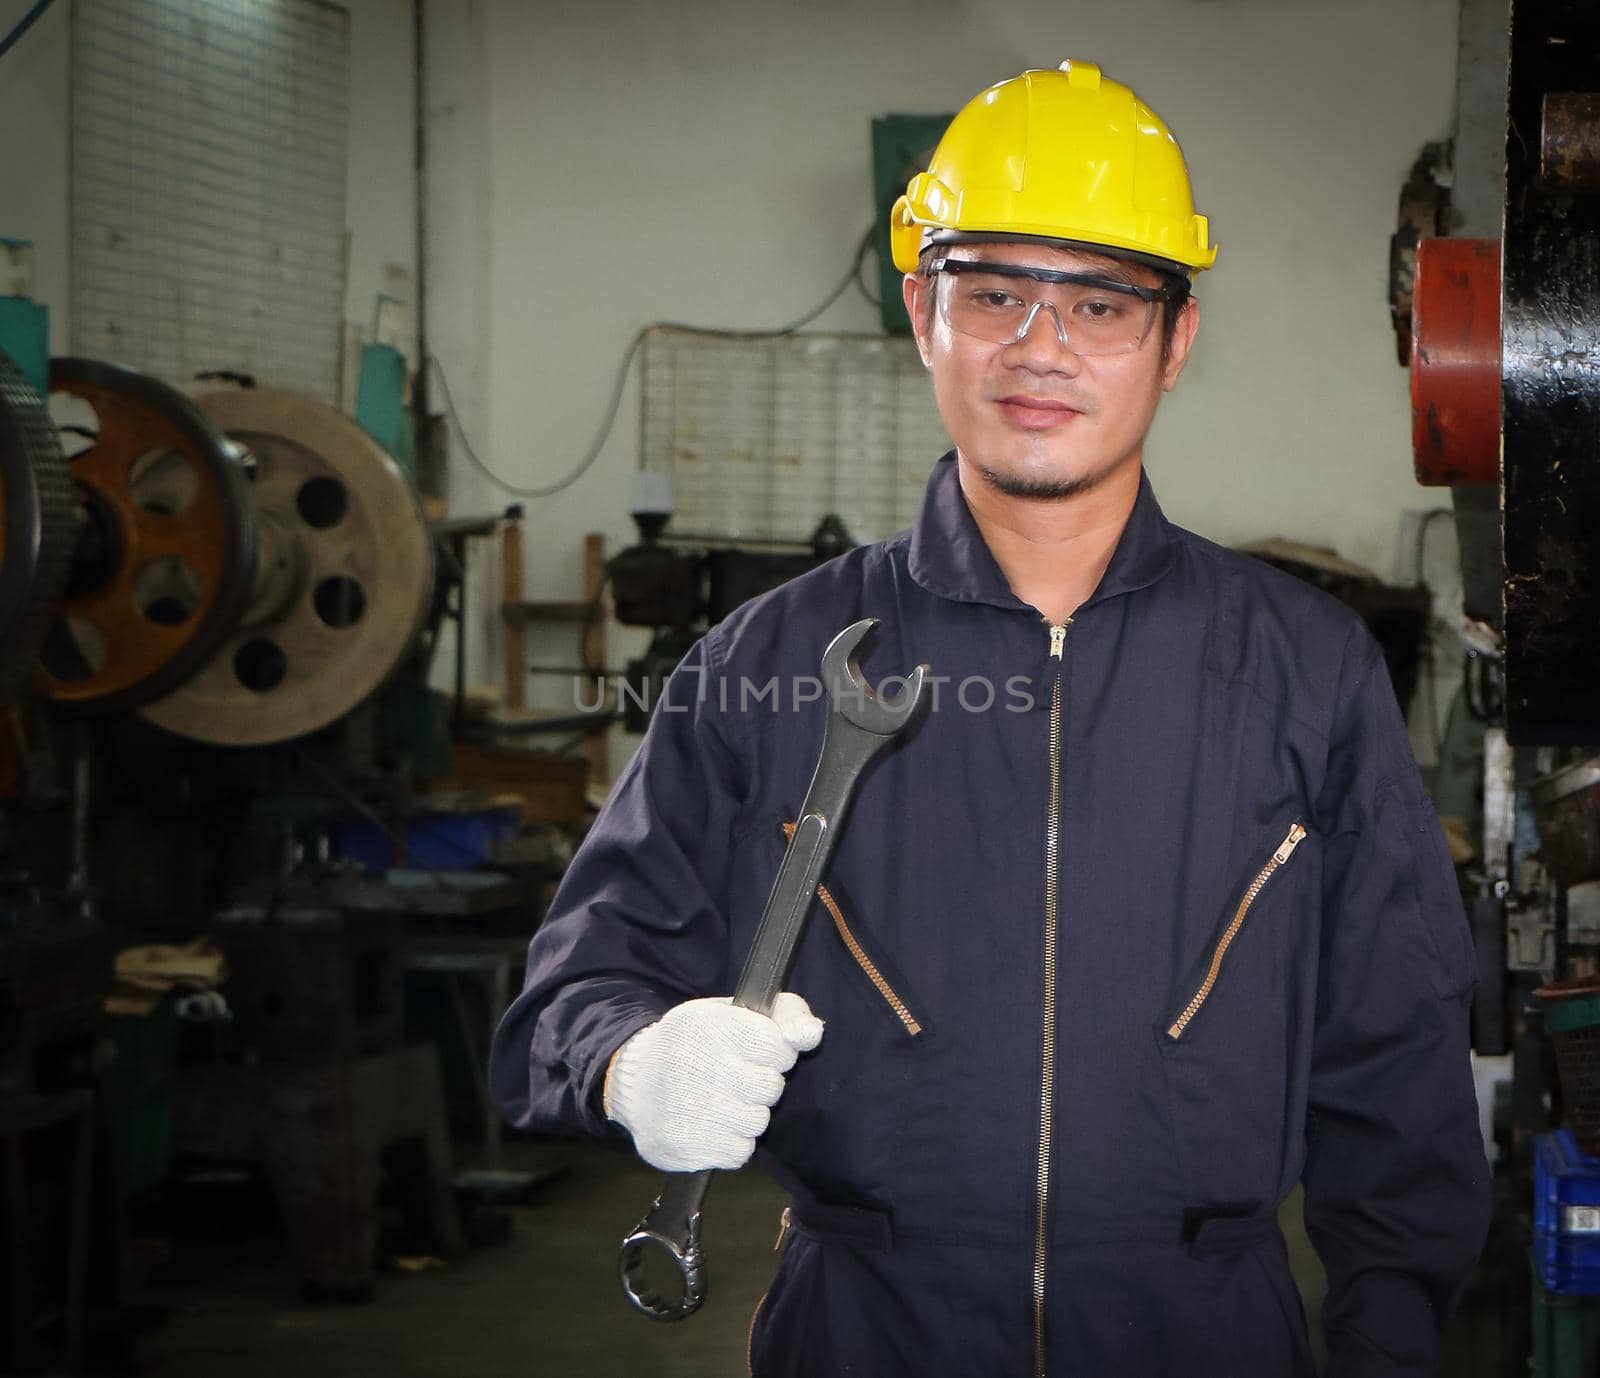 Asian male worker In industries that wear glasses, safety hats and safety uniforms Wrench tool holder stand Machine maintenance technician concept In the industry with confidence